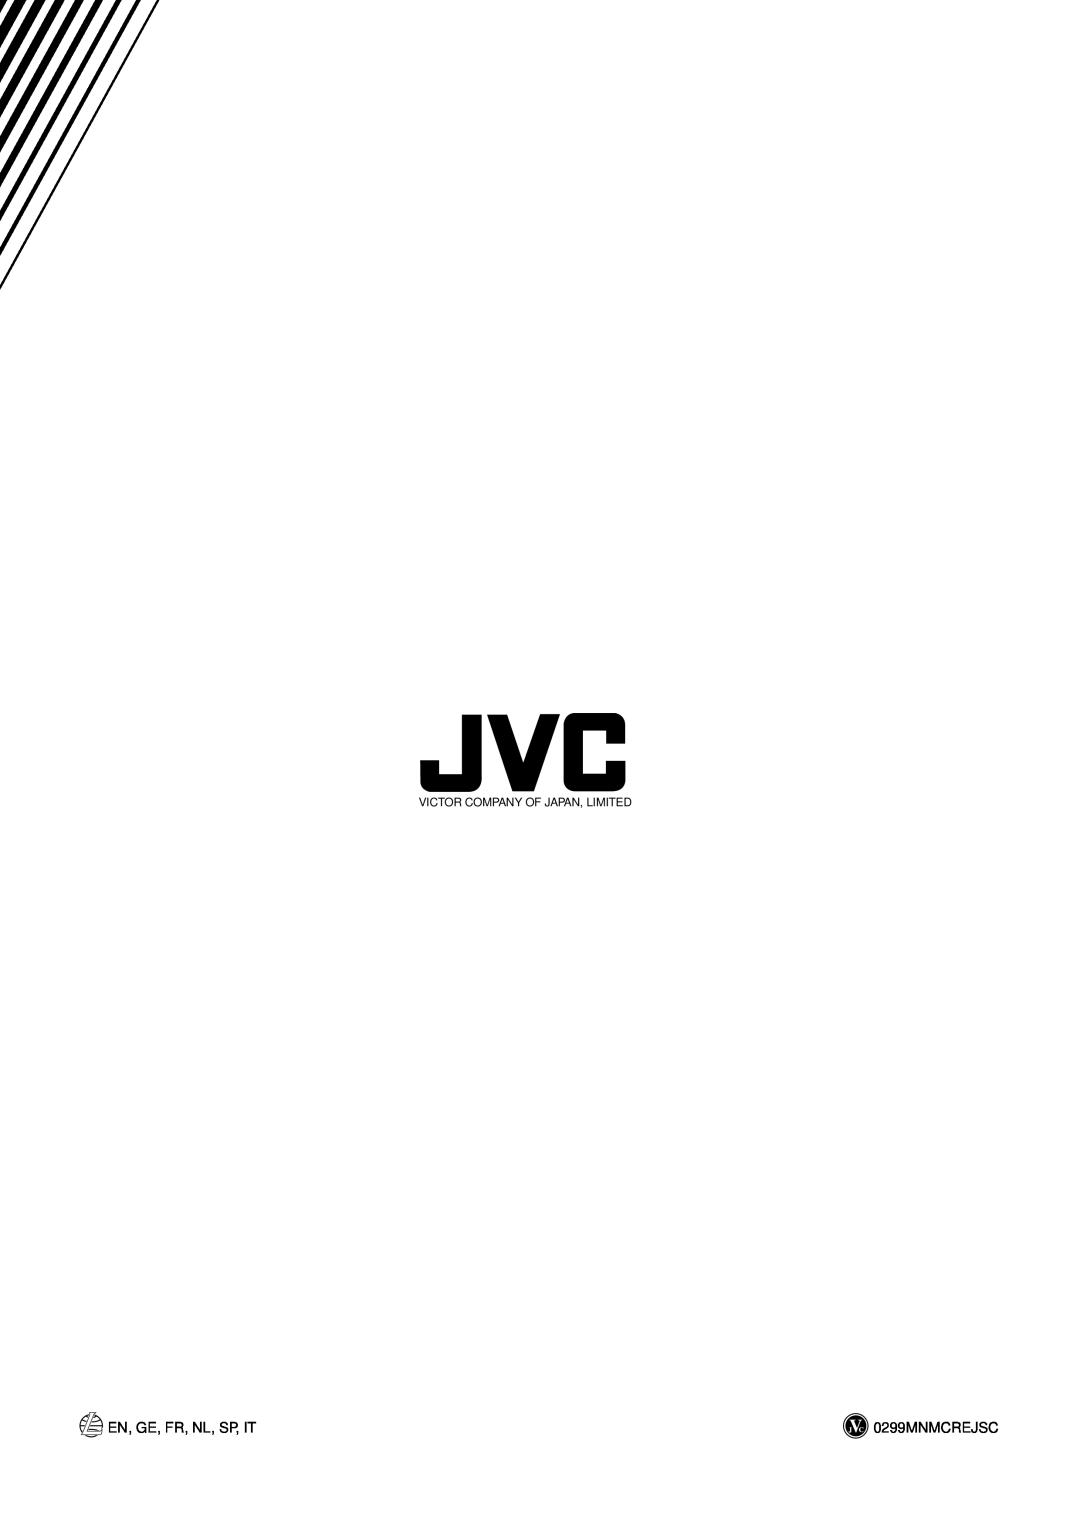 JVC LVT0211-001A, RM-RXUV5R, UX-V5R manual En, Ge, Fr, Nl, Sp, It, 0299MNMCREJSC, Victor Company Of Japan, Limited 